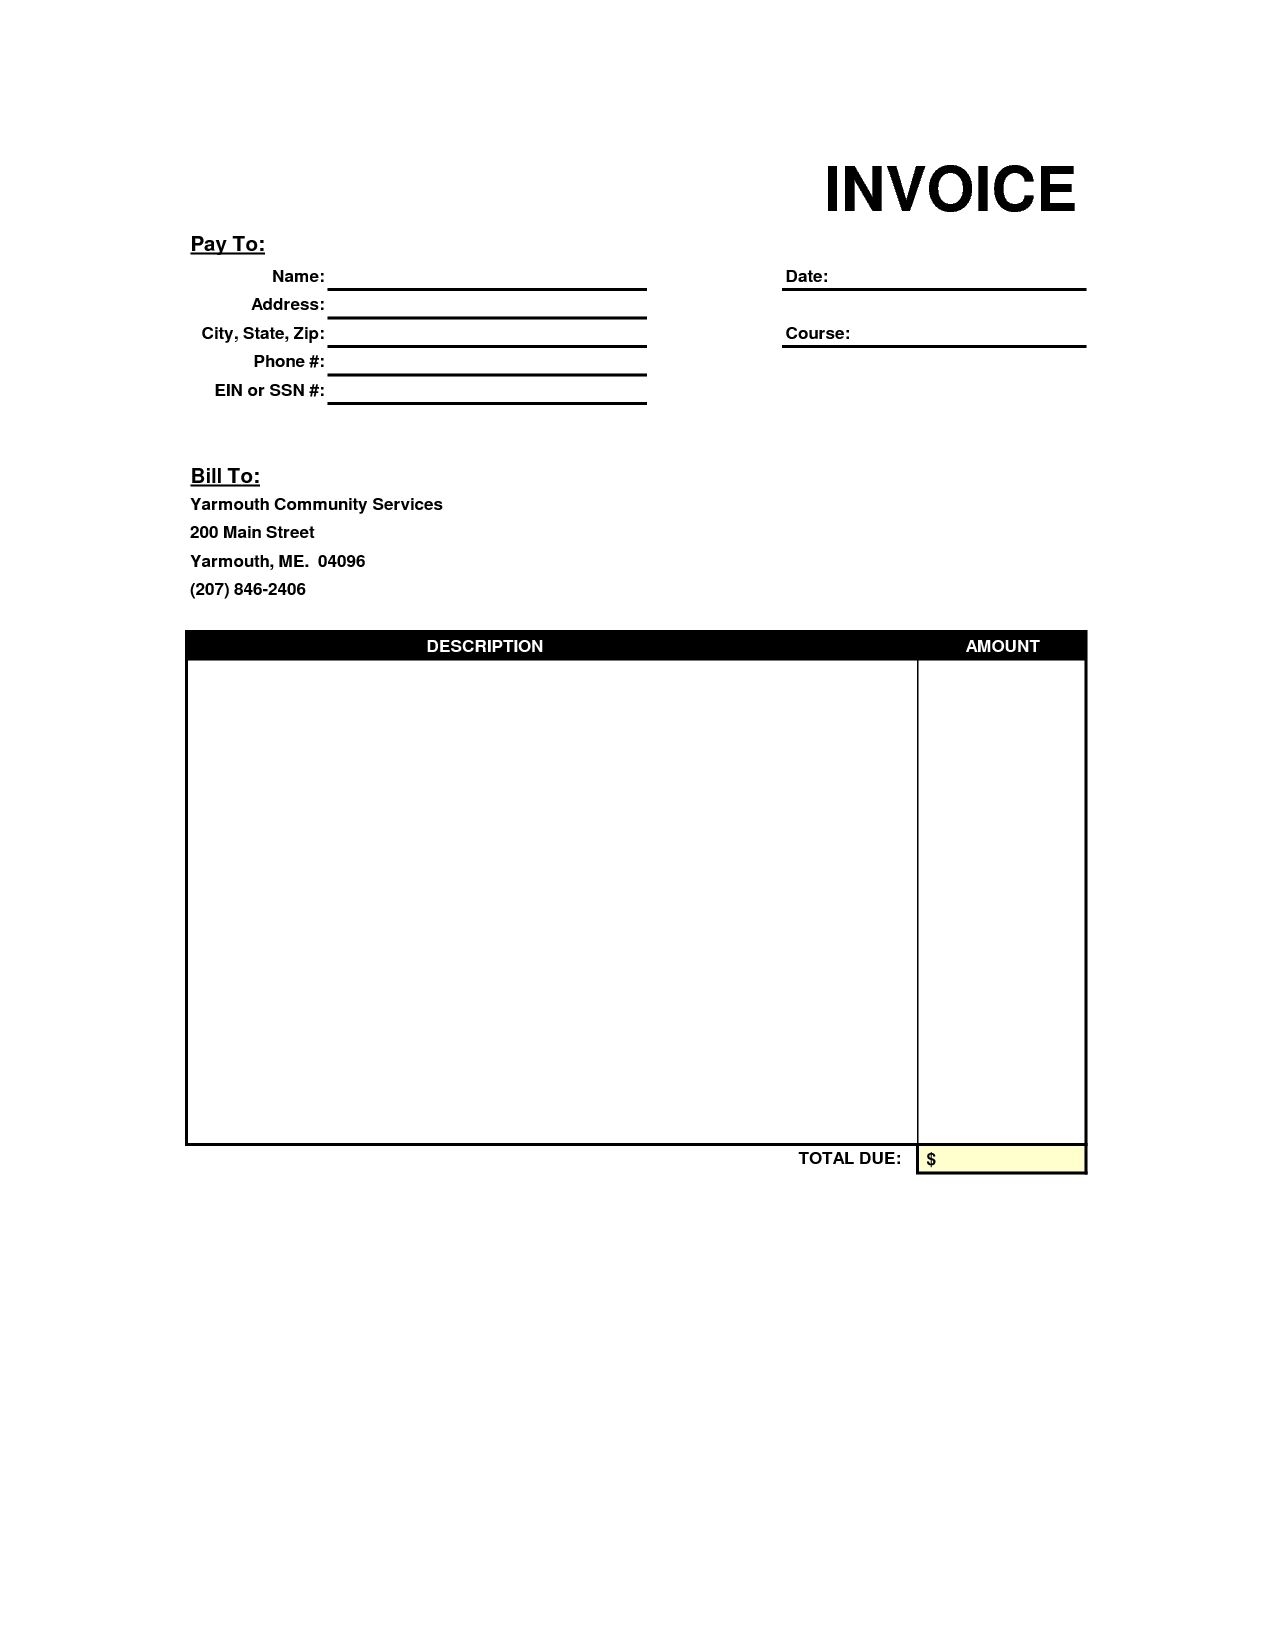 blank copy of an invoice google recruiter resume copy of free fillable invoice form